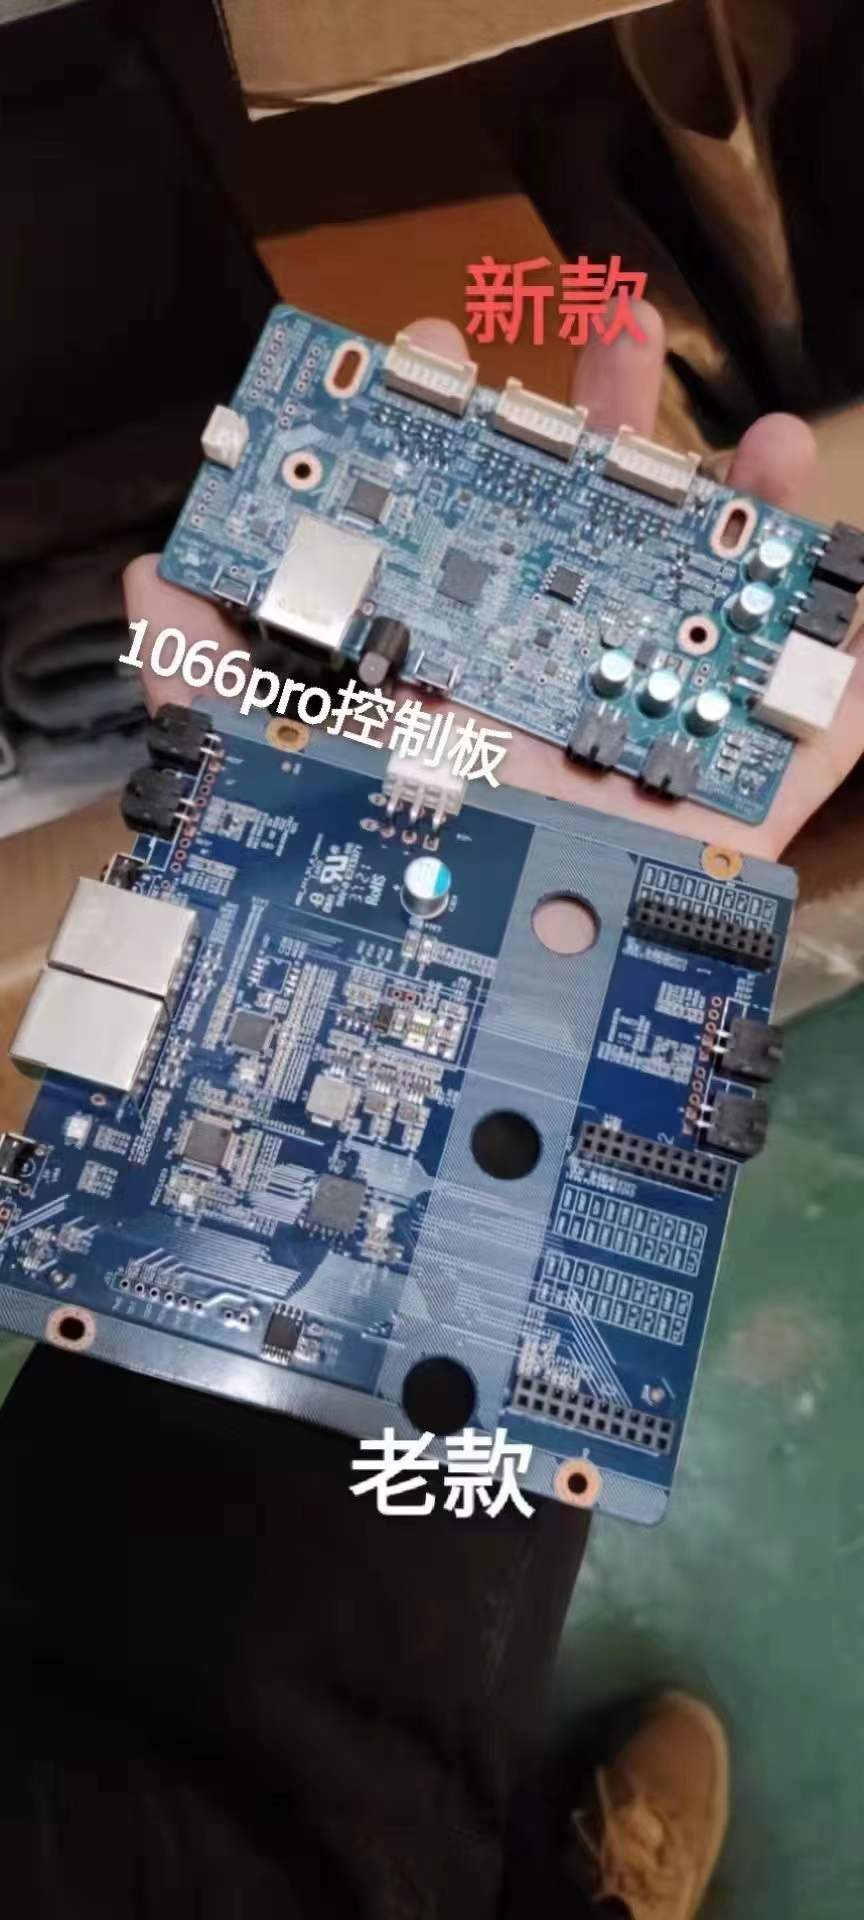 Control board for antminer S19 S19+